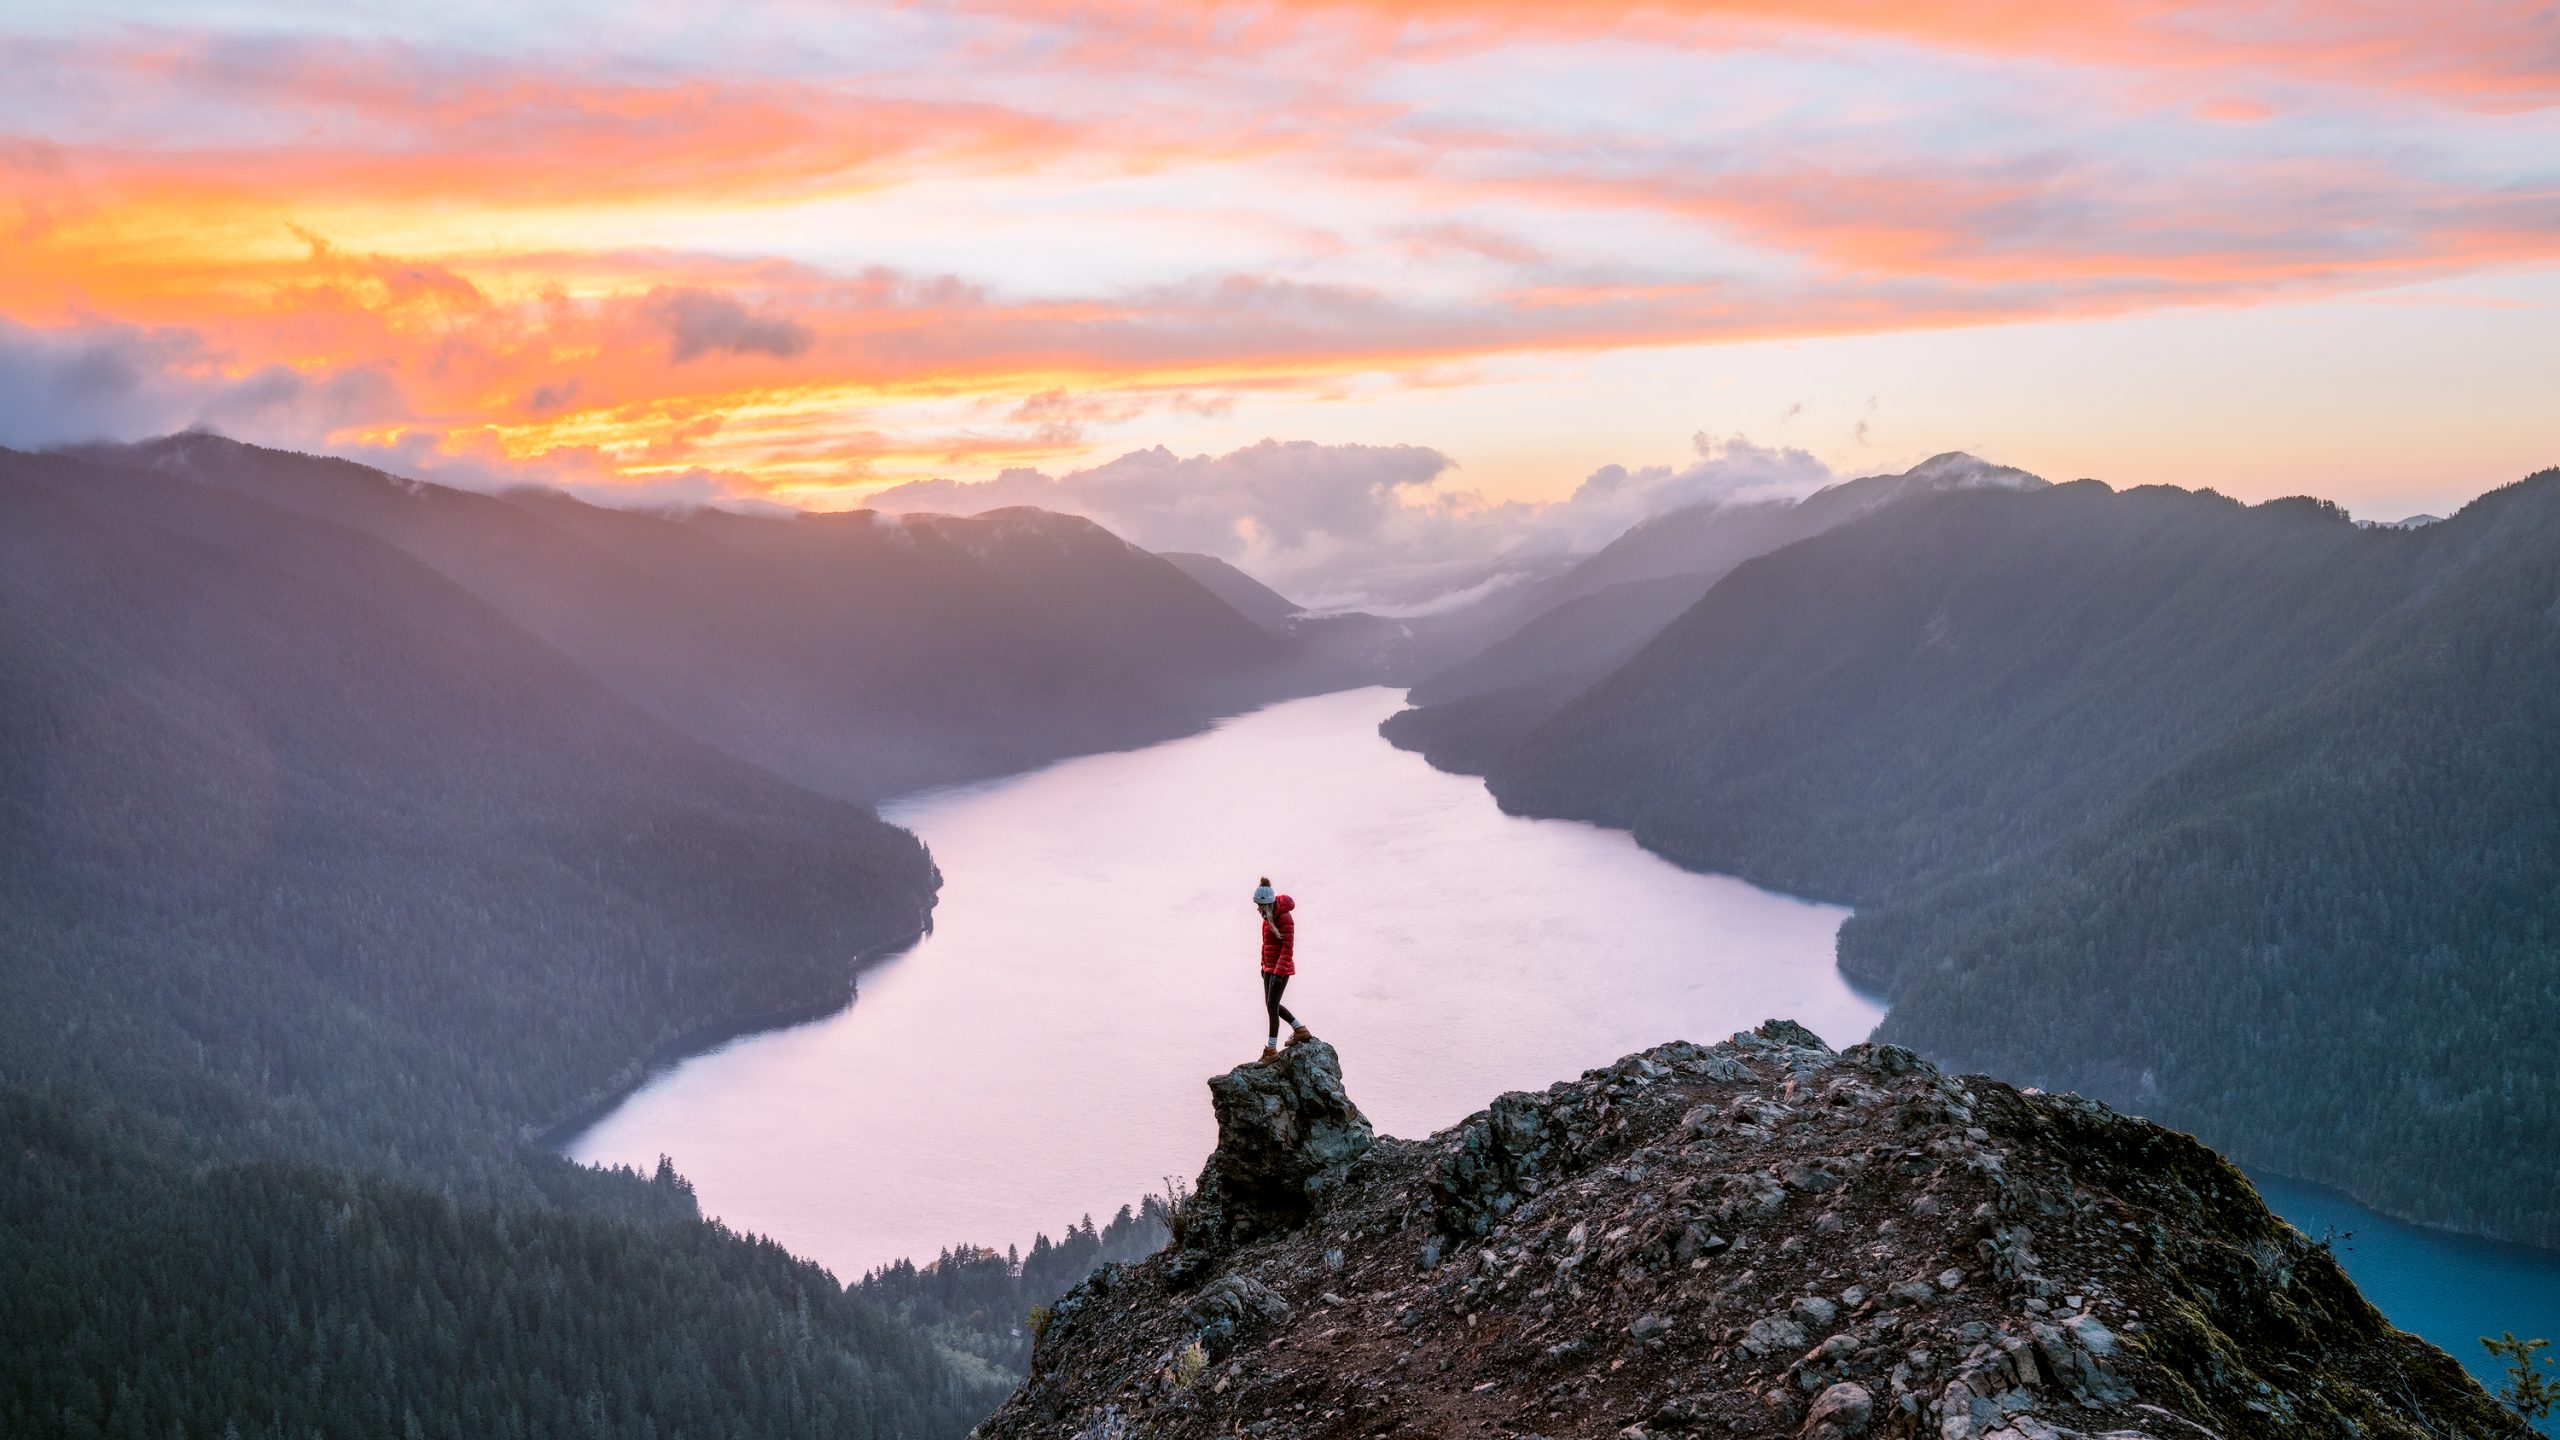 Olympic-National-Park-Adventure-Getaway-24-Hour-Itinerary-from-Seattle-Renee-Roaming-Mount-Storm-King-Hike-BANNER